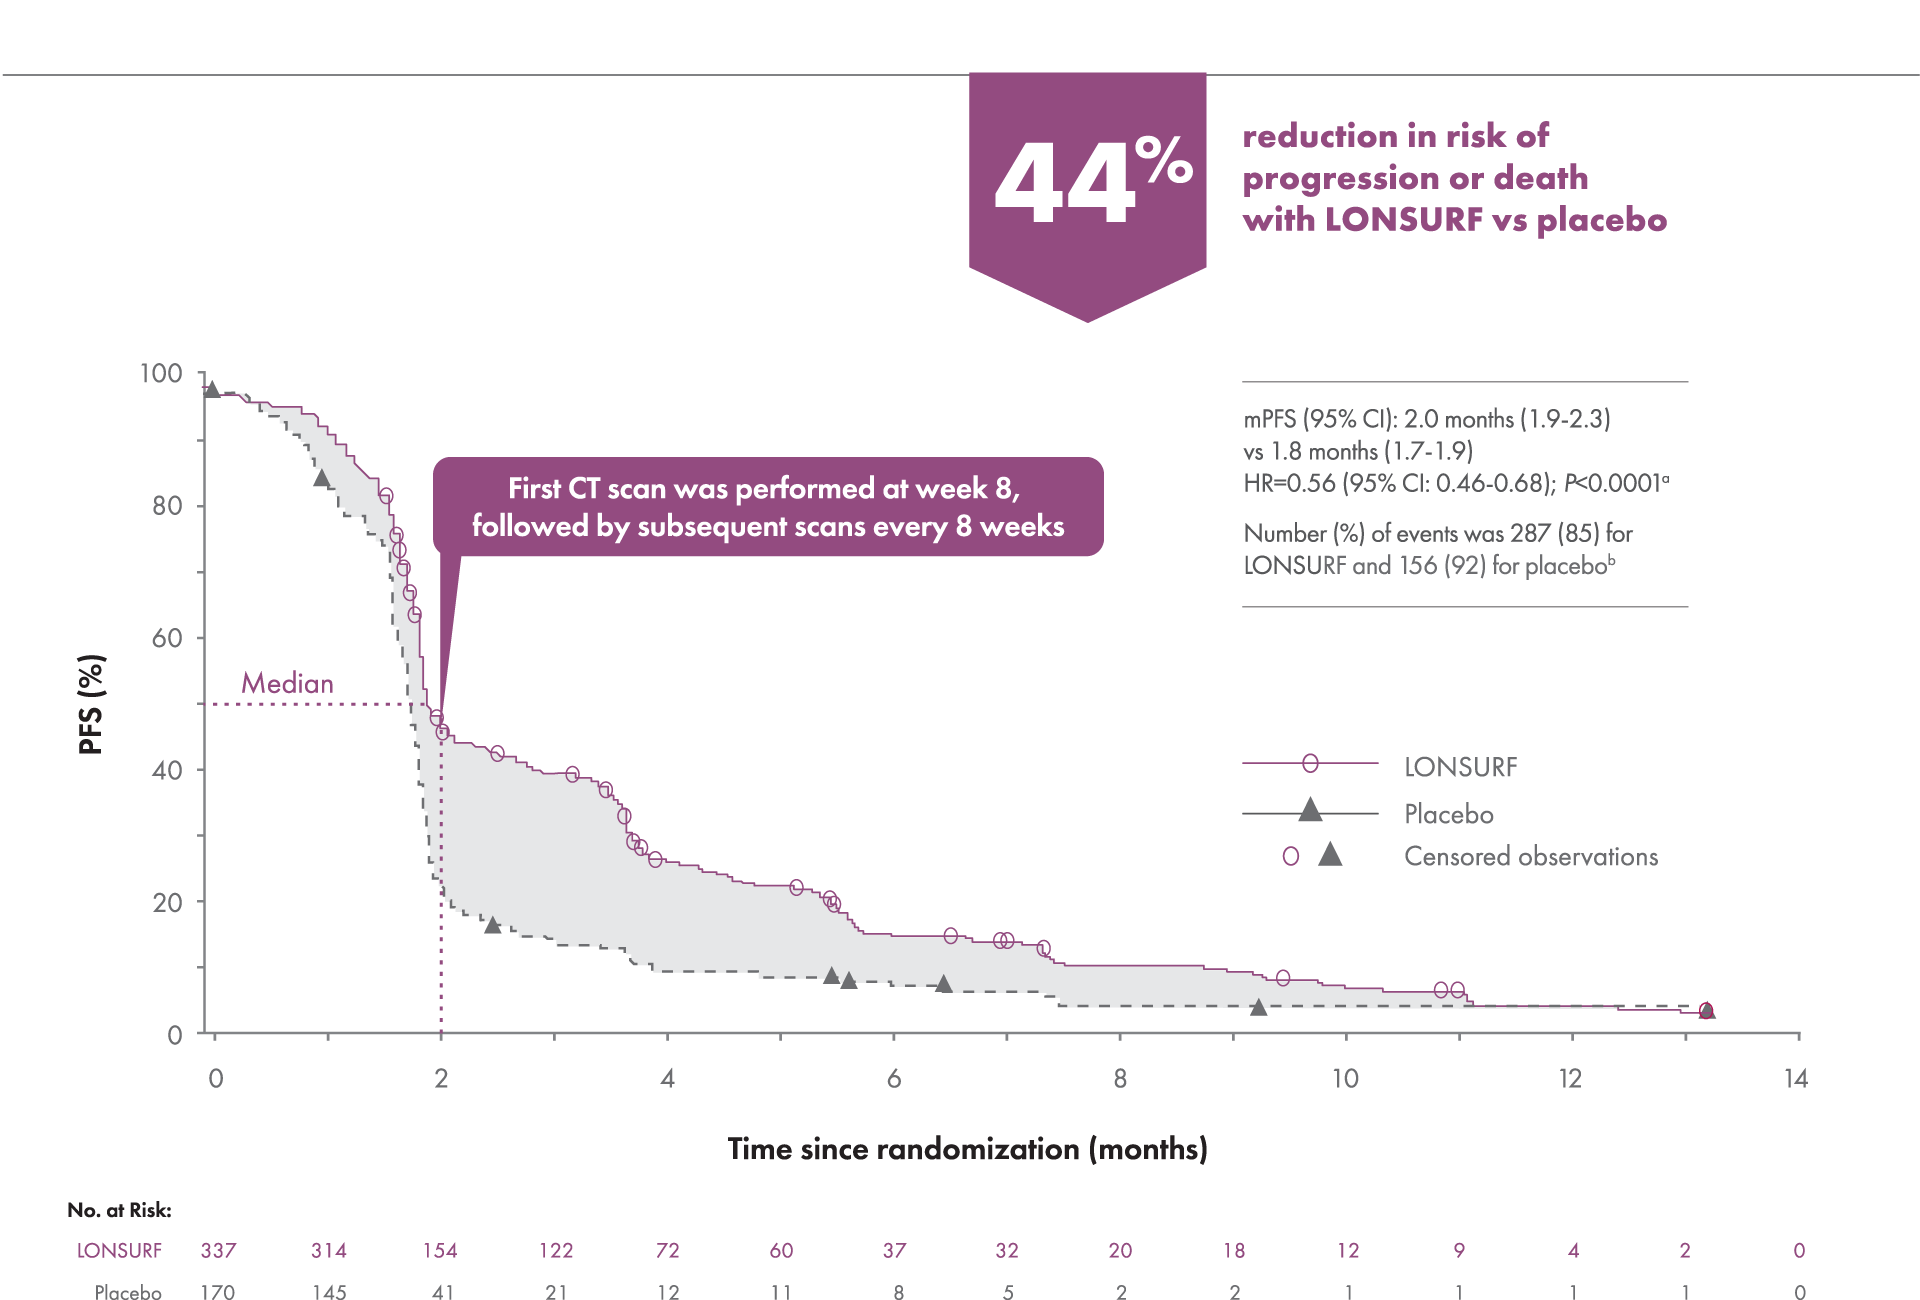 Graph showing reduction in risk of progression for previously treated metastatic GEJ or gastric cancer with single-agent LONSURF